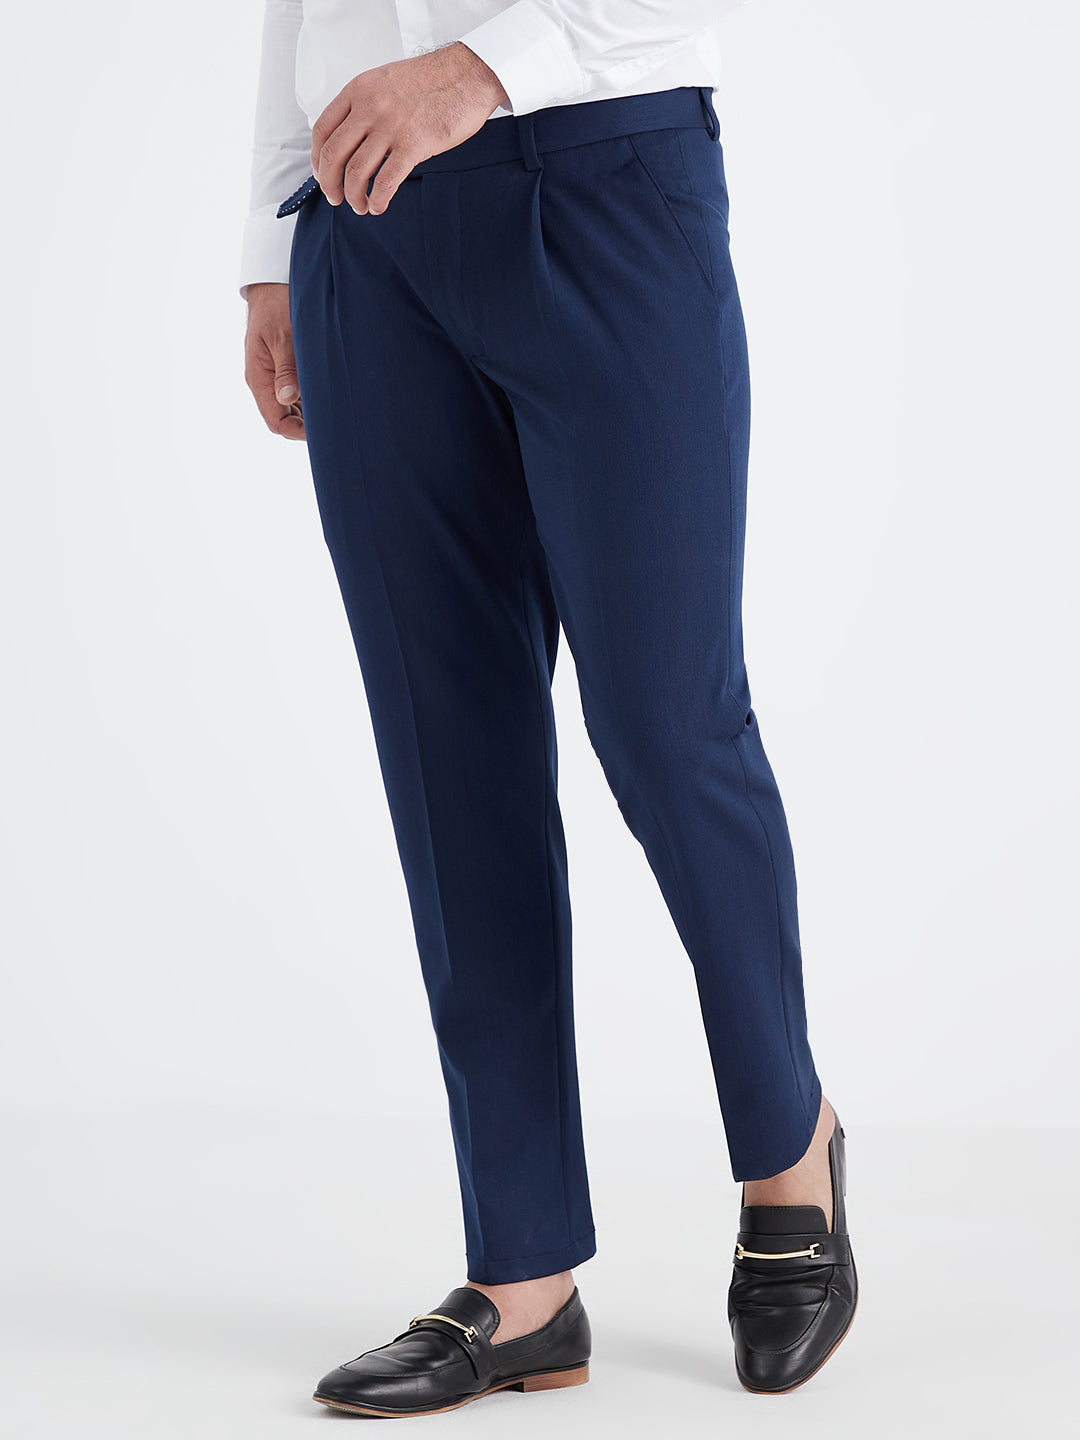 What clothes will go well with women's blue pants? - Quora